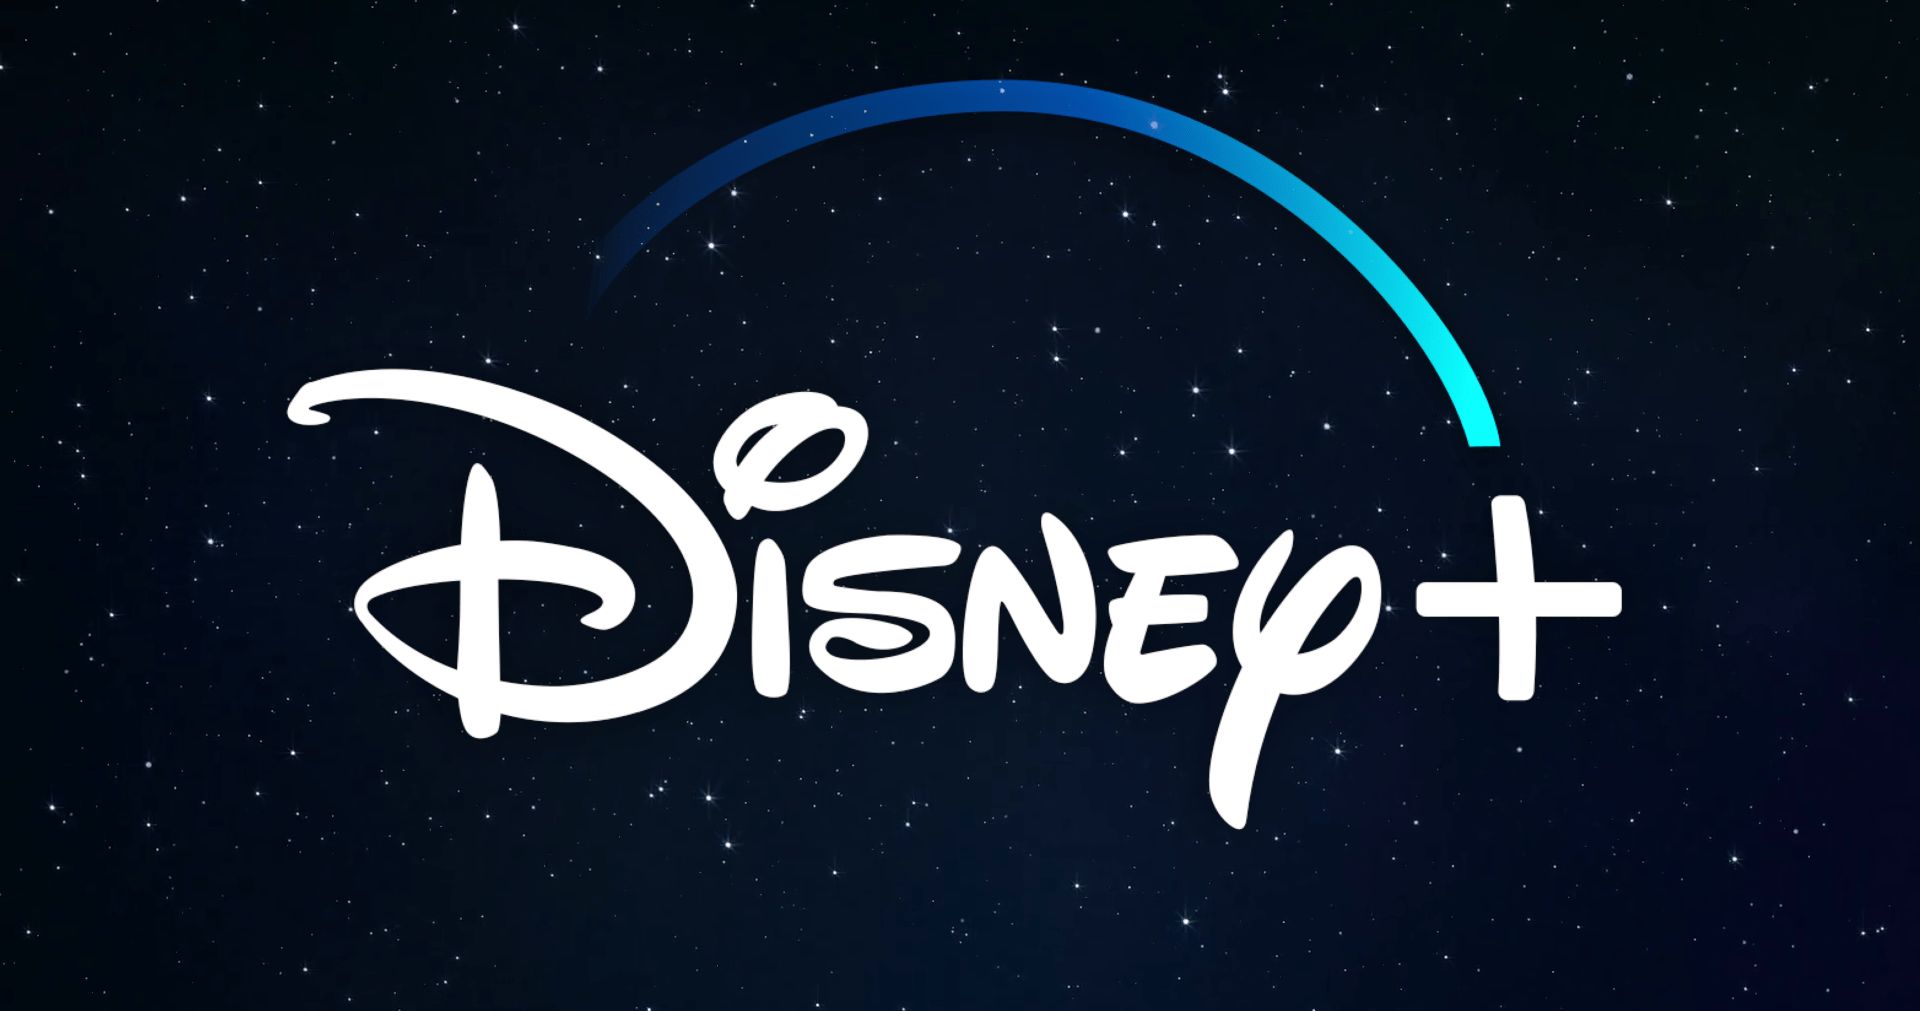 Disney+ Soars Past 10M Subscribers One Day After Launch